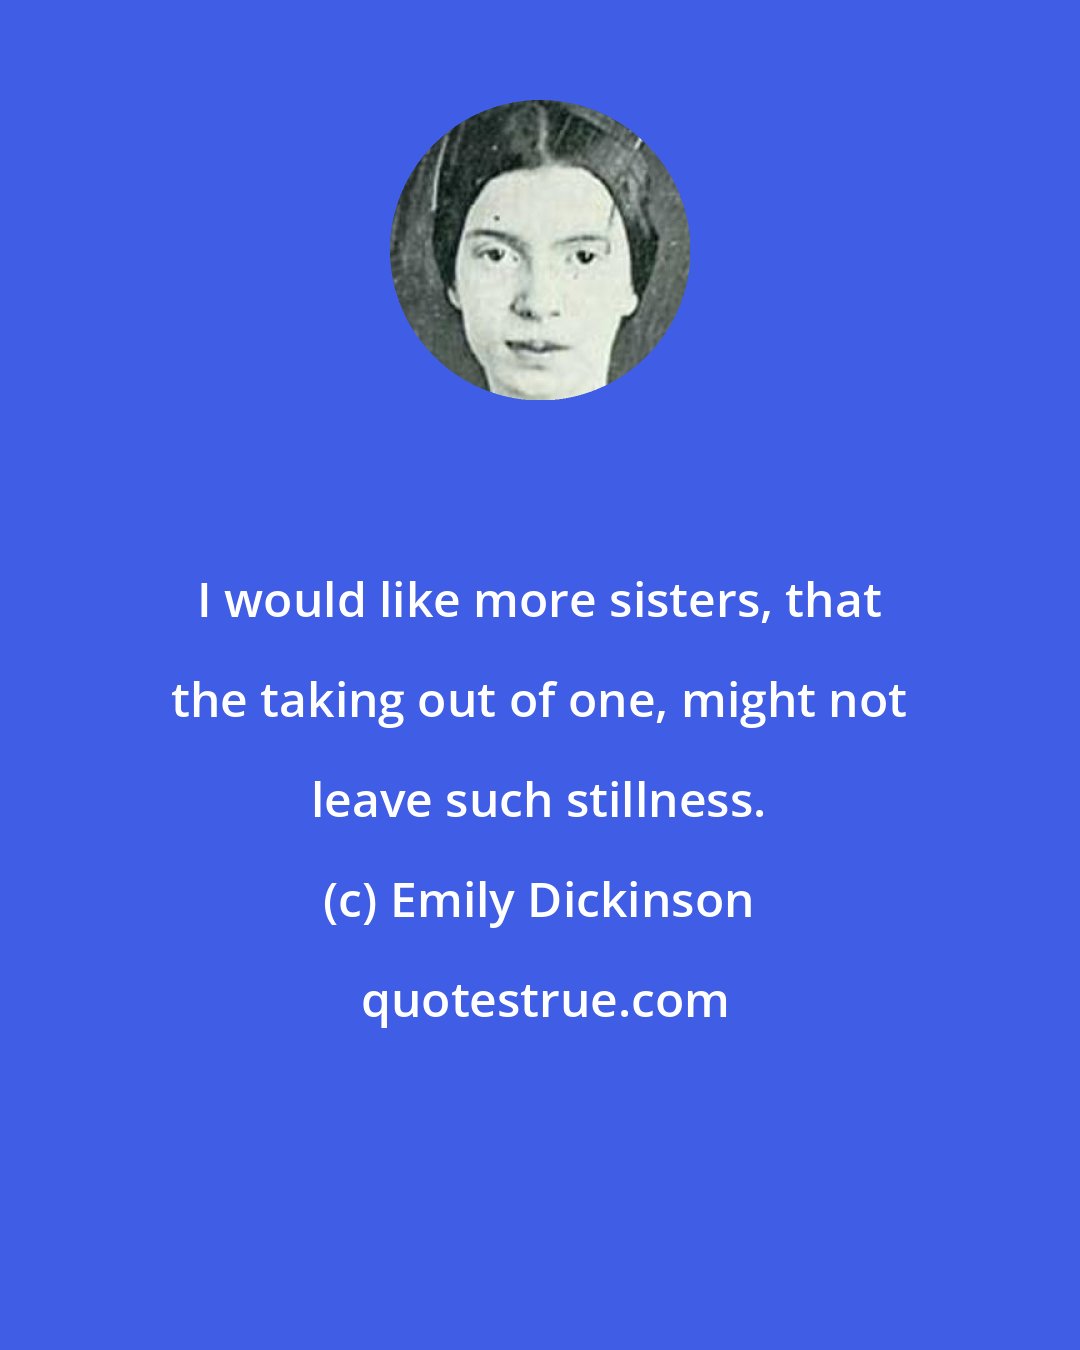 Emily Dickinson: I would like more sisters, that the taking out of one, might not leave such stillness.